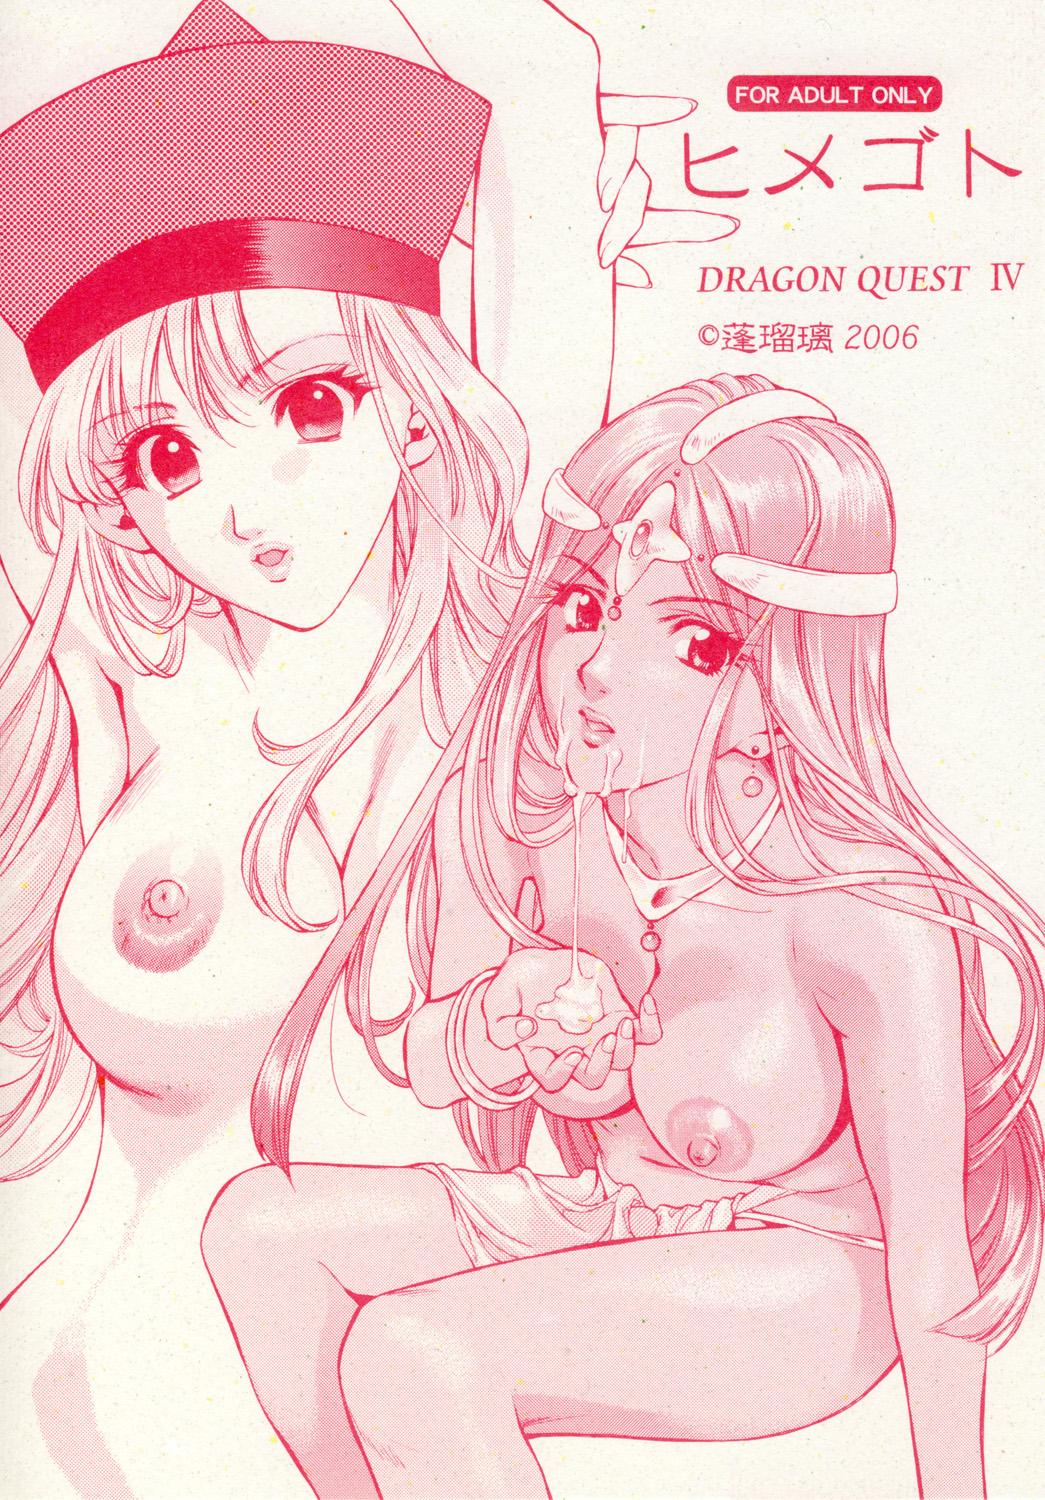 Bigtits Himegoto - Dragon quest iv Gayclips - Picture 1